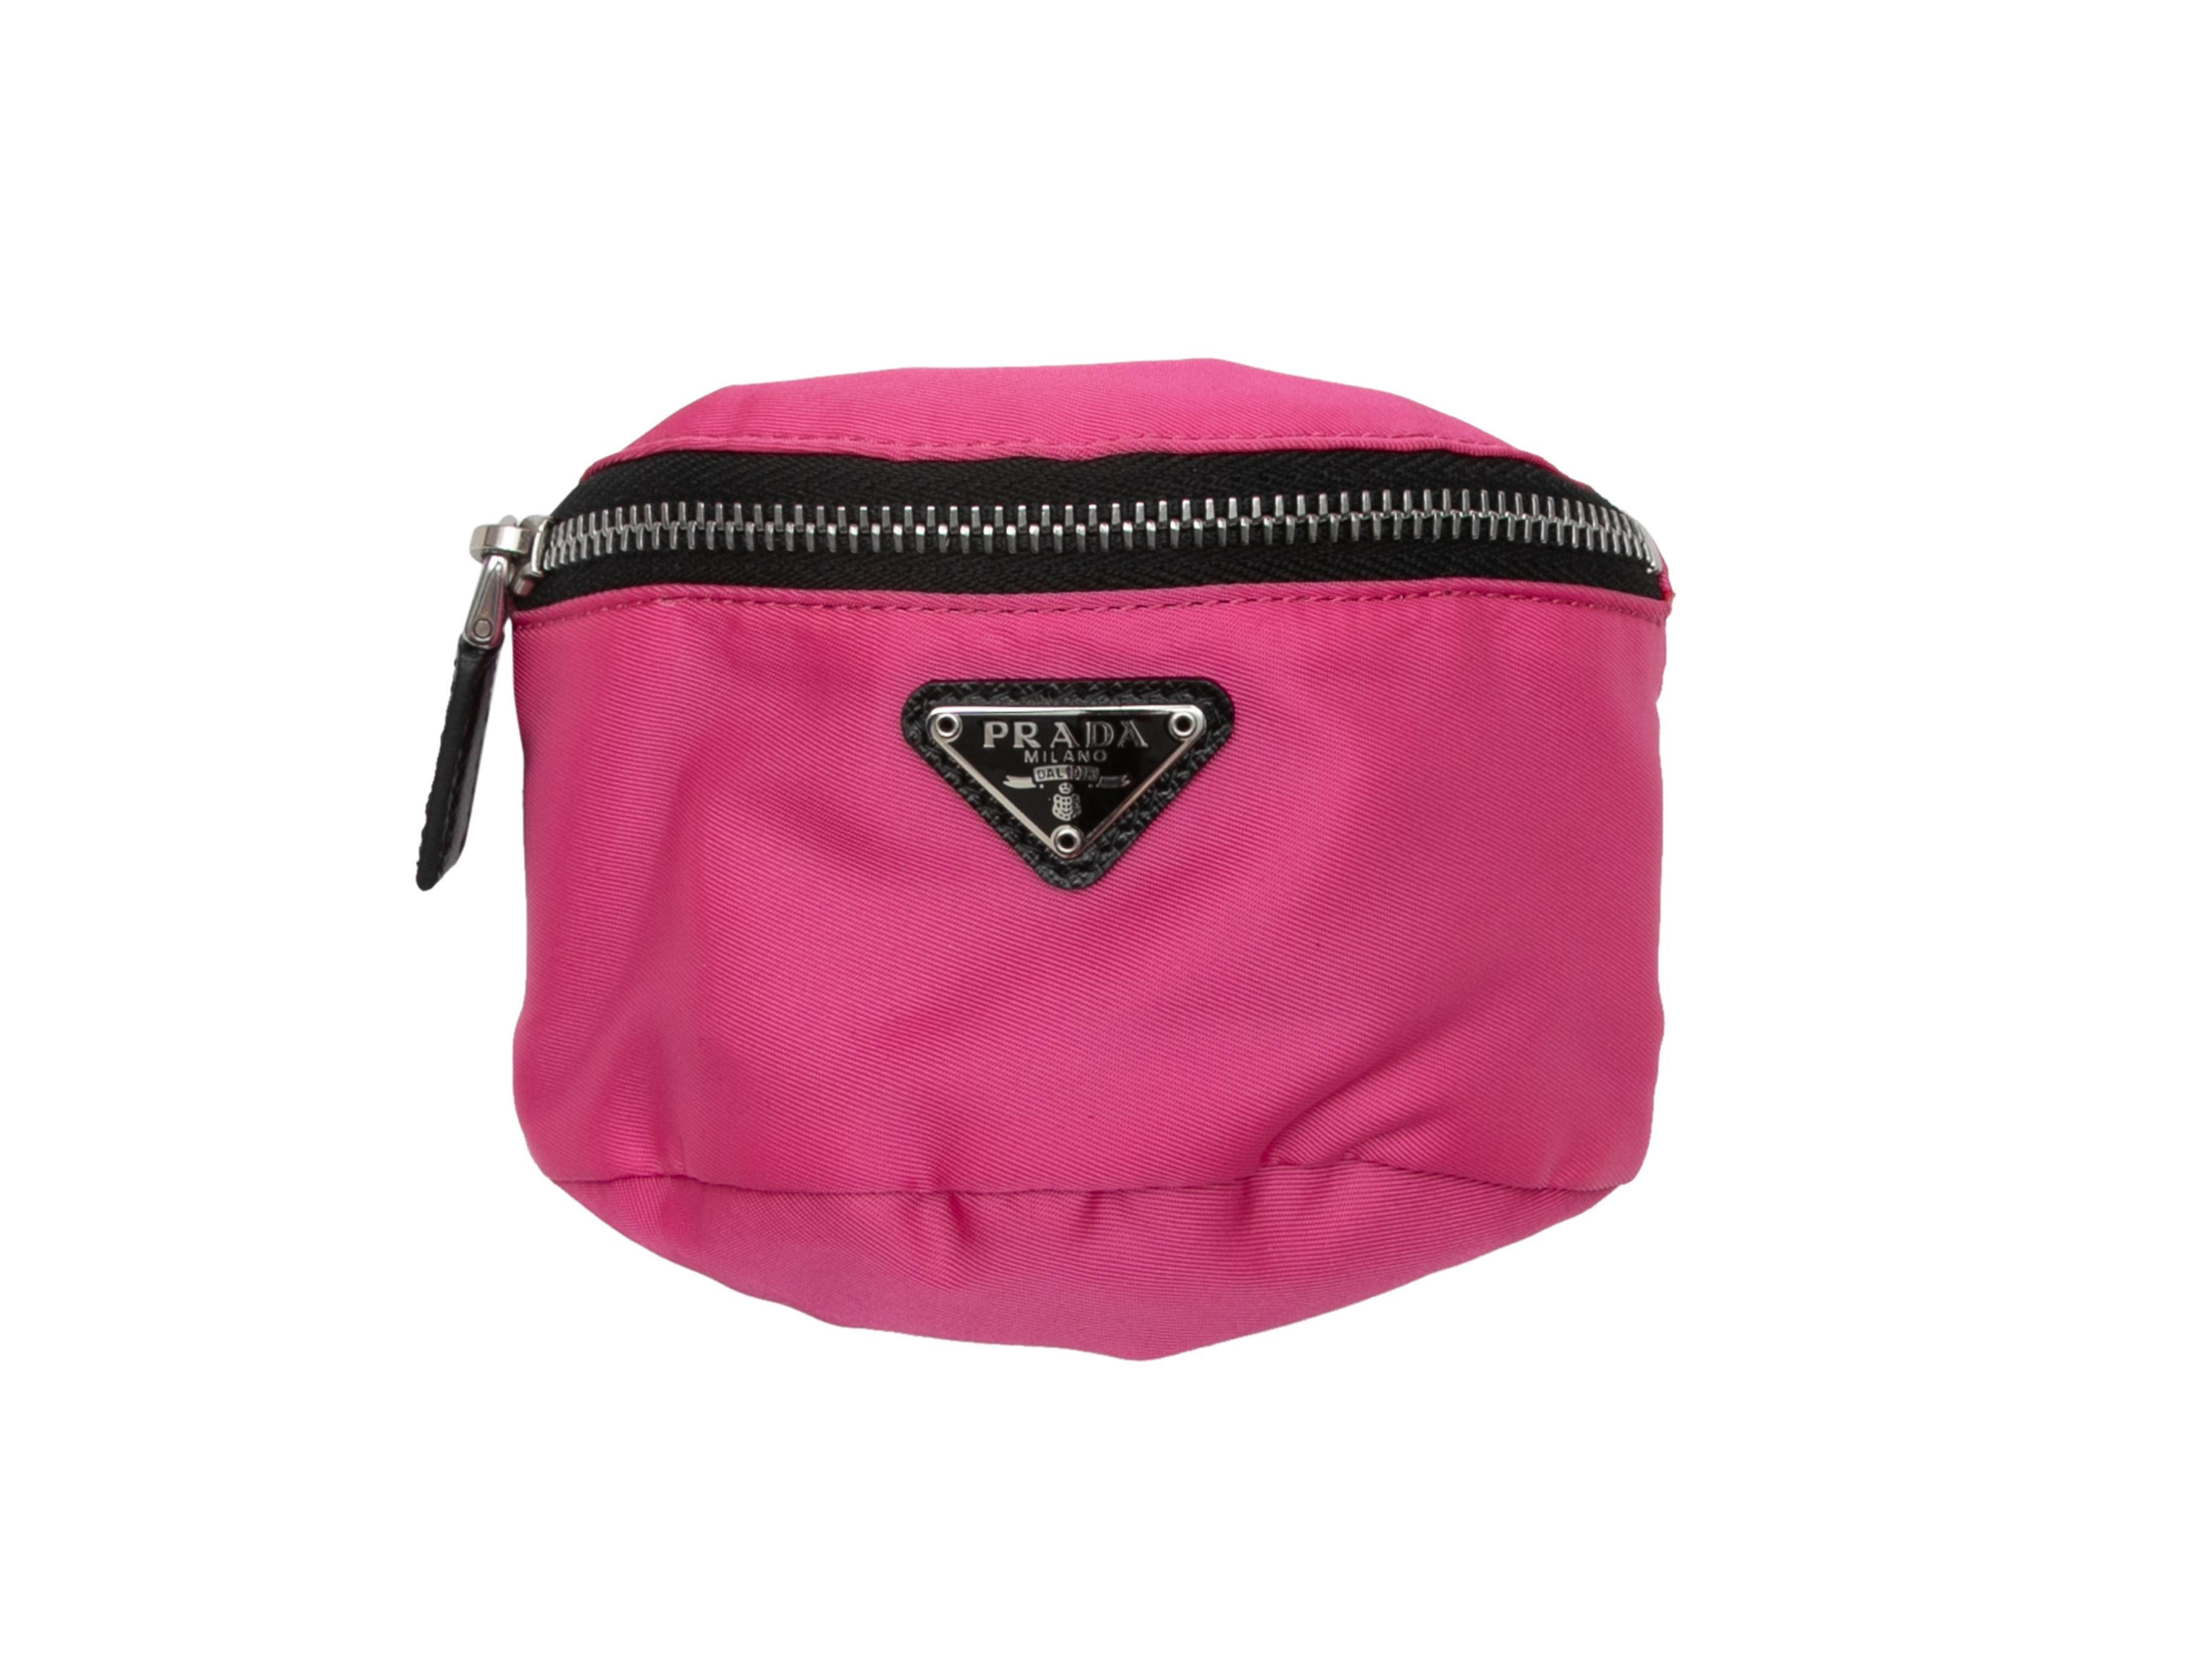 Pink and black Re-Nylon wristlet pouch by Prada. Adjustable band. Zip closure. 4